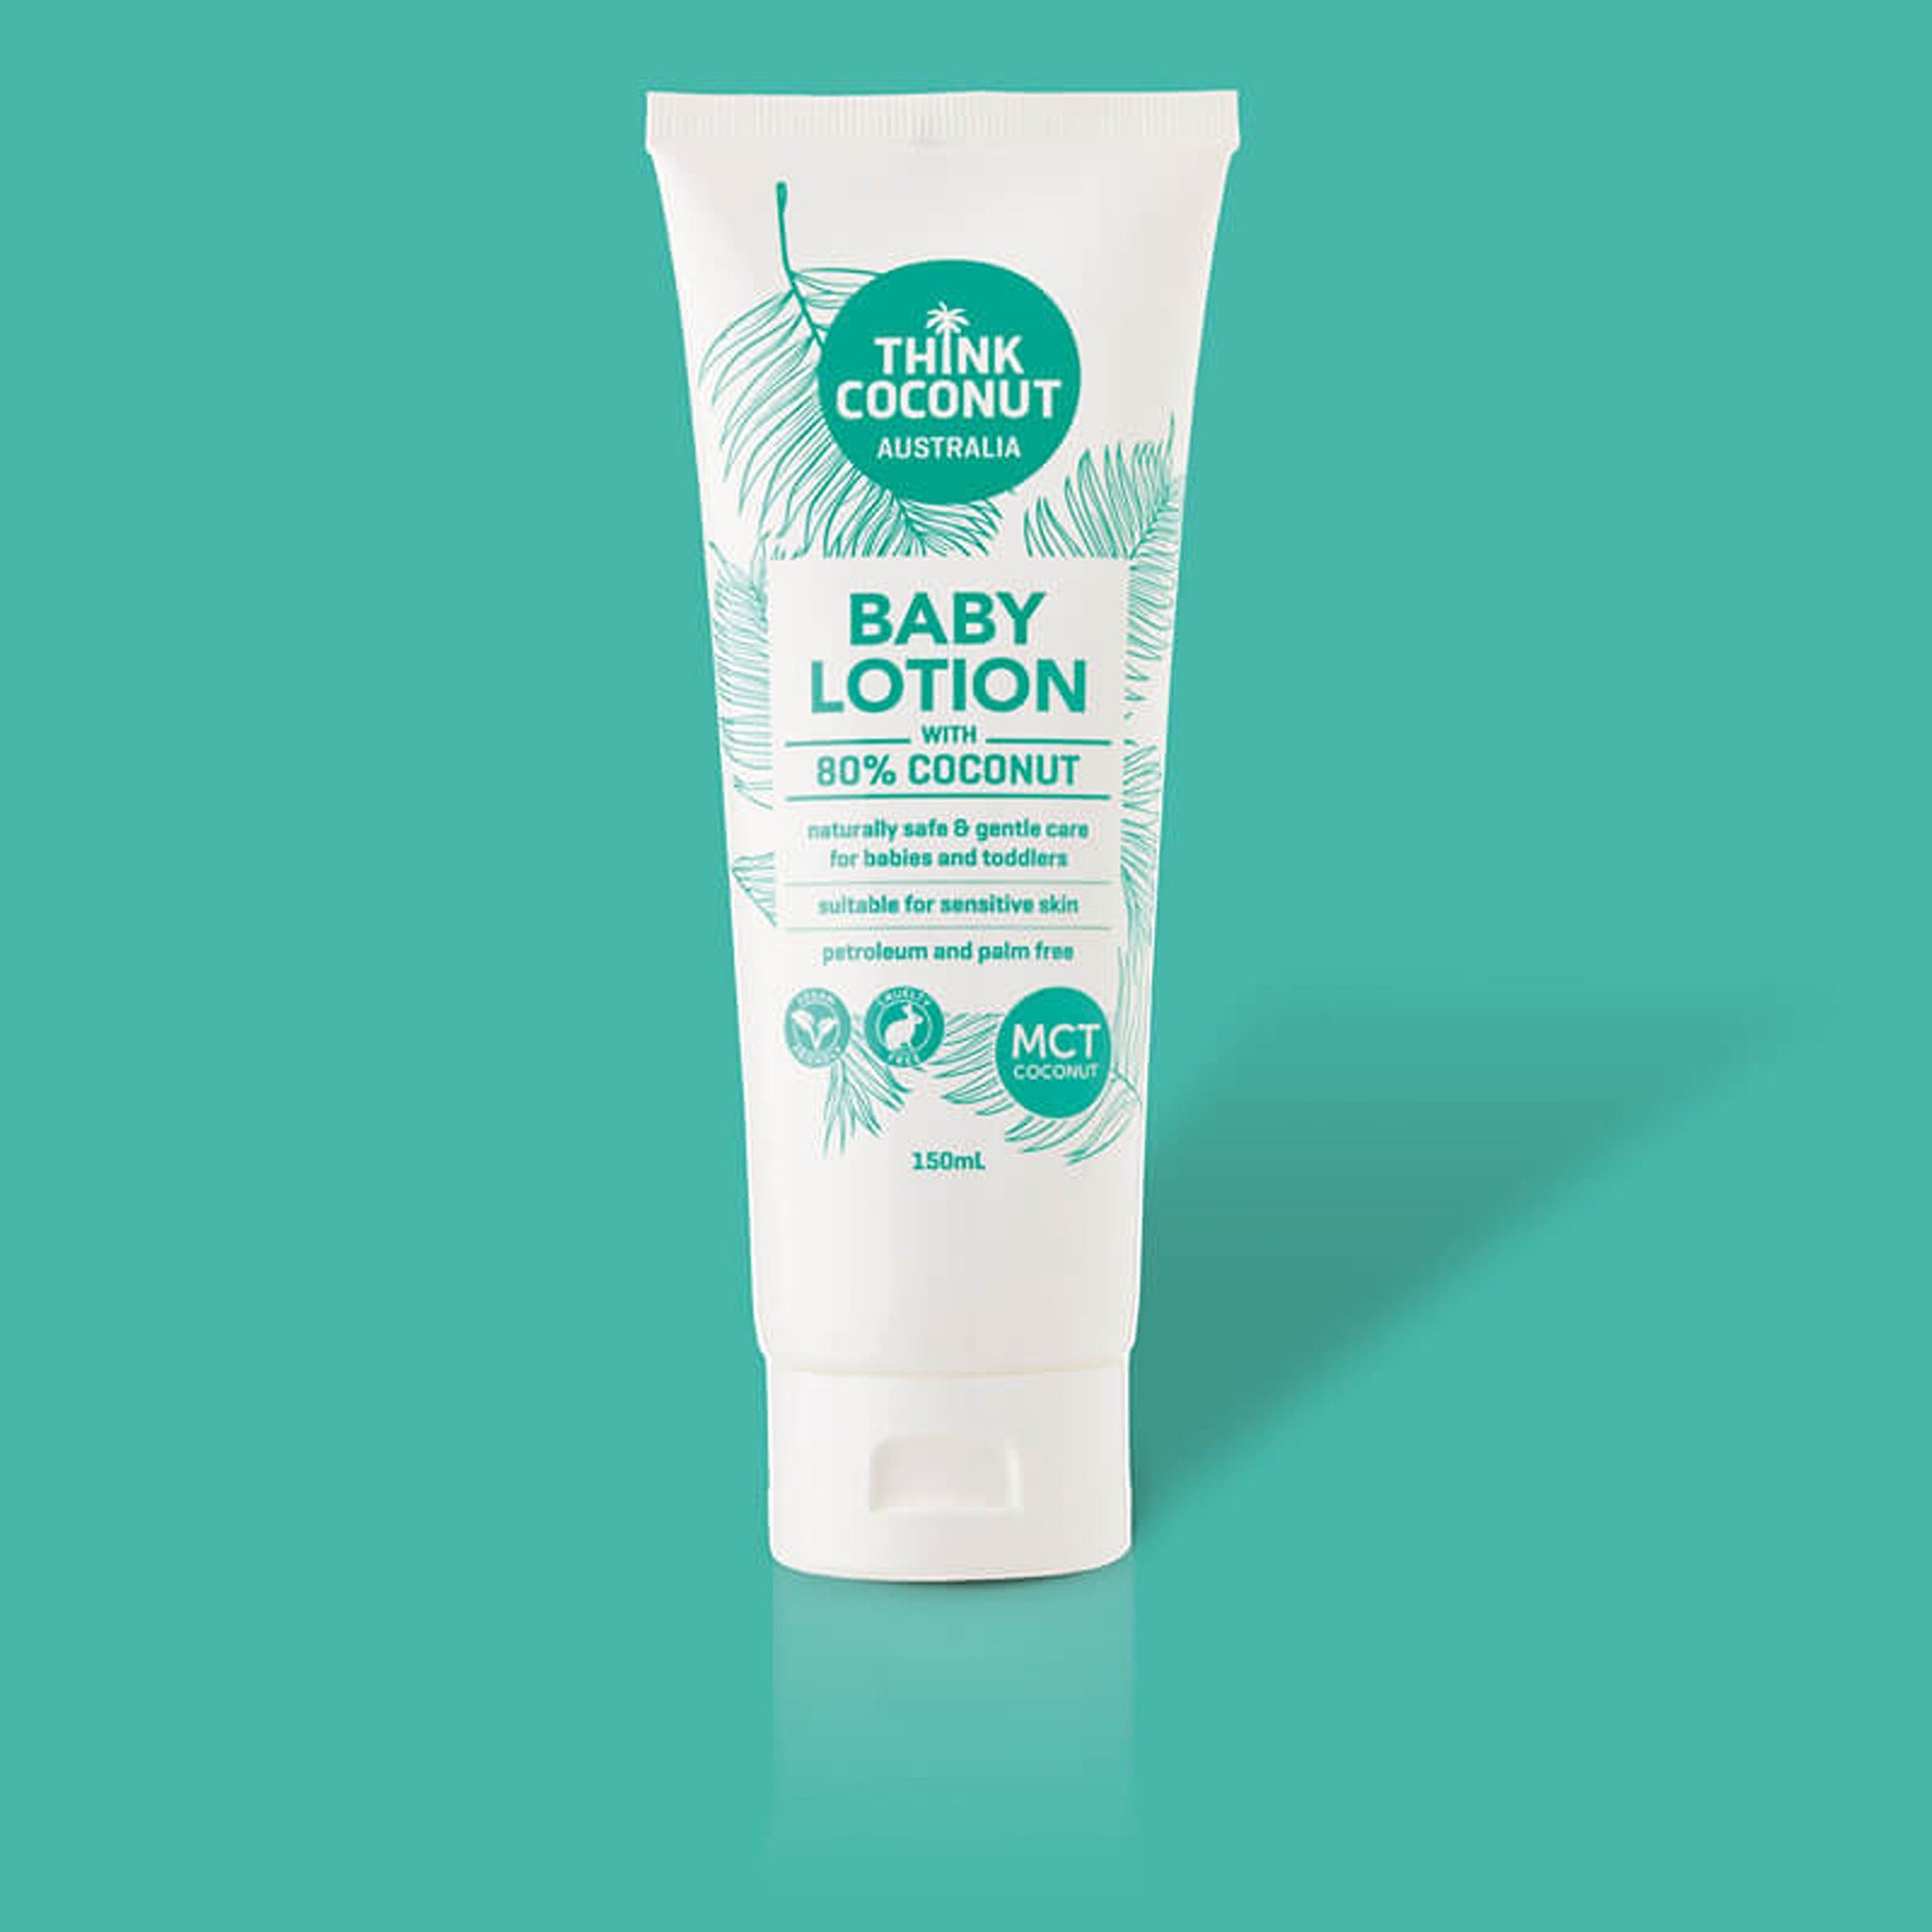 Think Coconut Baby Lotion 150mL